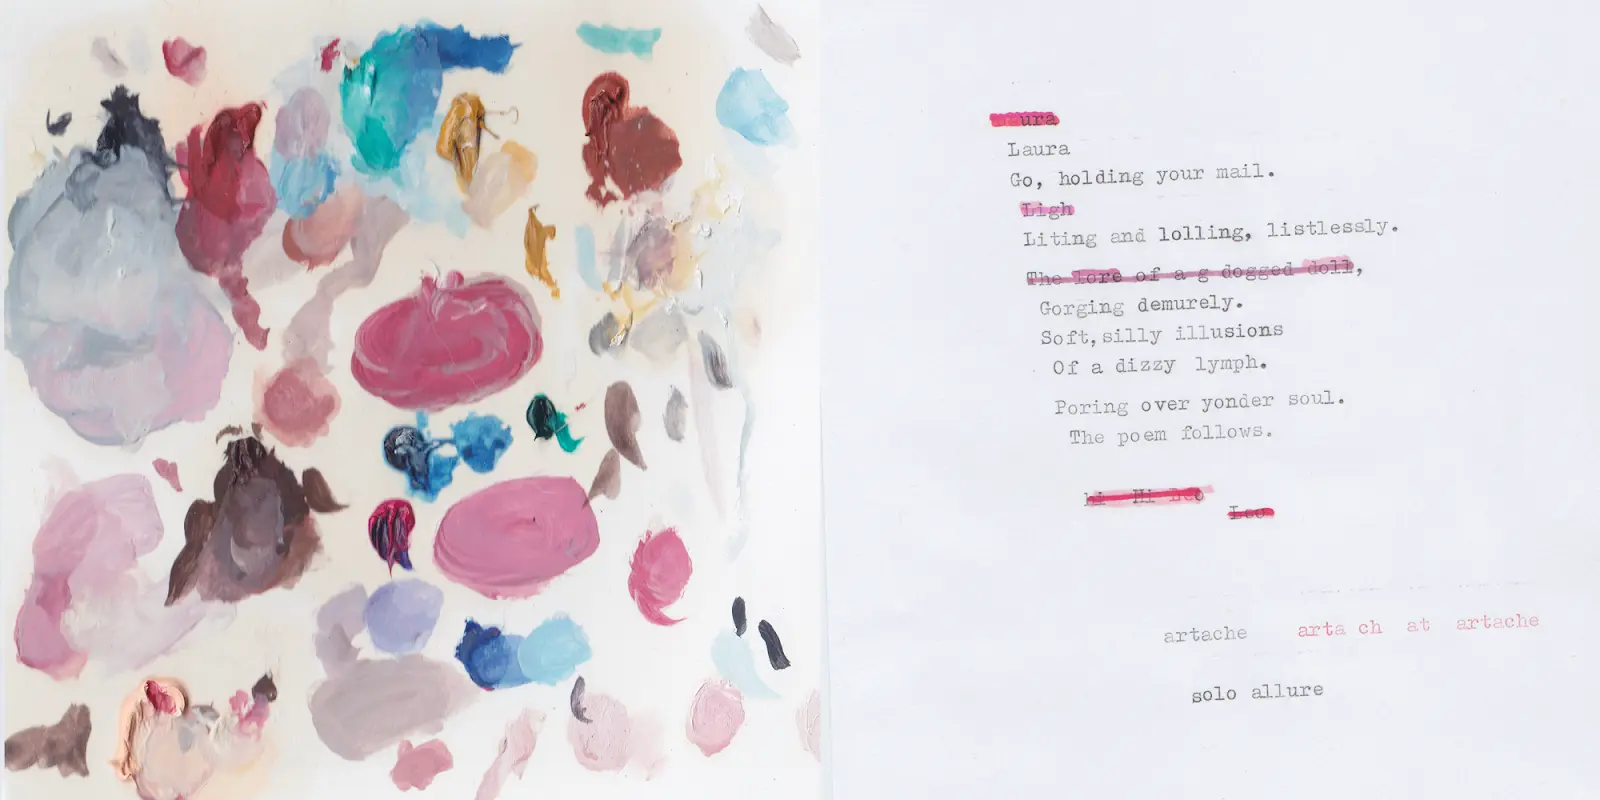 Muted swatches of paint alongside words: “Laura Go, holding your mail. Little and lolling, listlessly. Gorging demurely. Soft, silly illusions Of a dizzy lymph. Poring over yonder soul. The poem follows.”